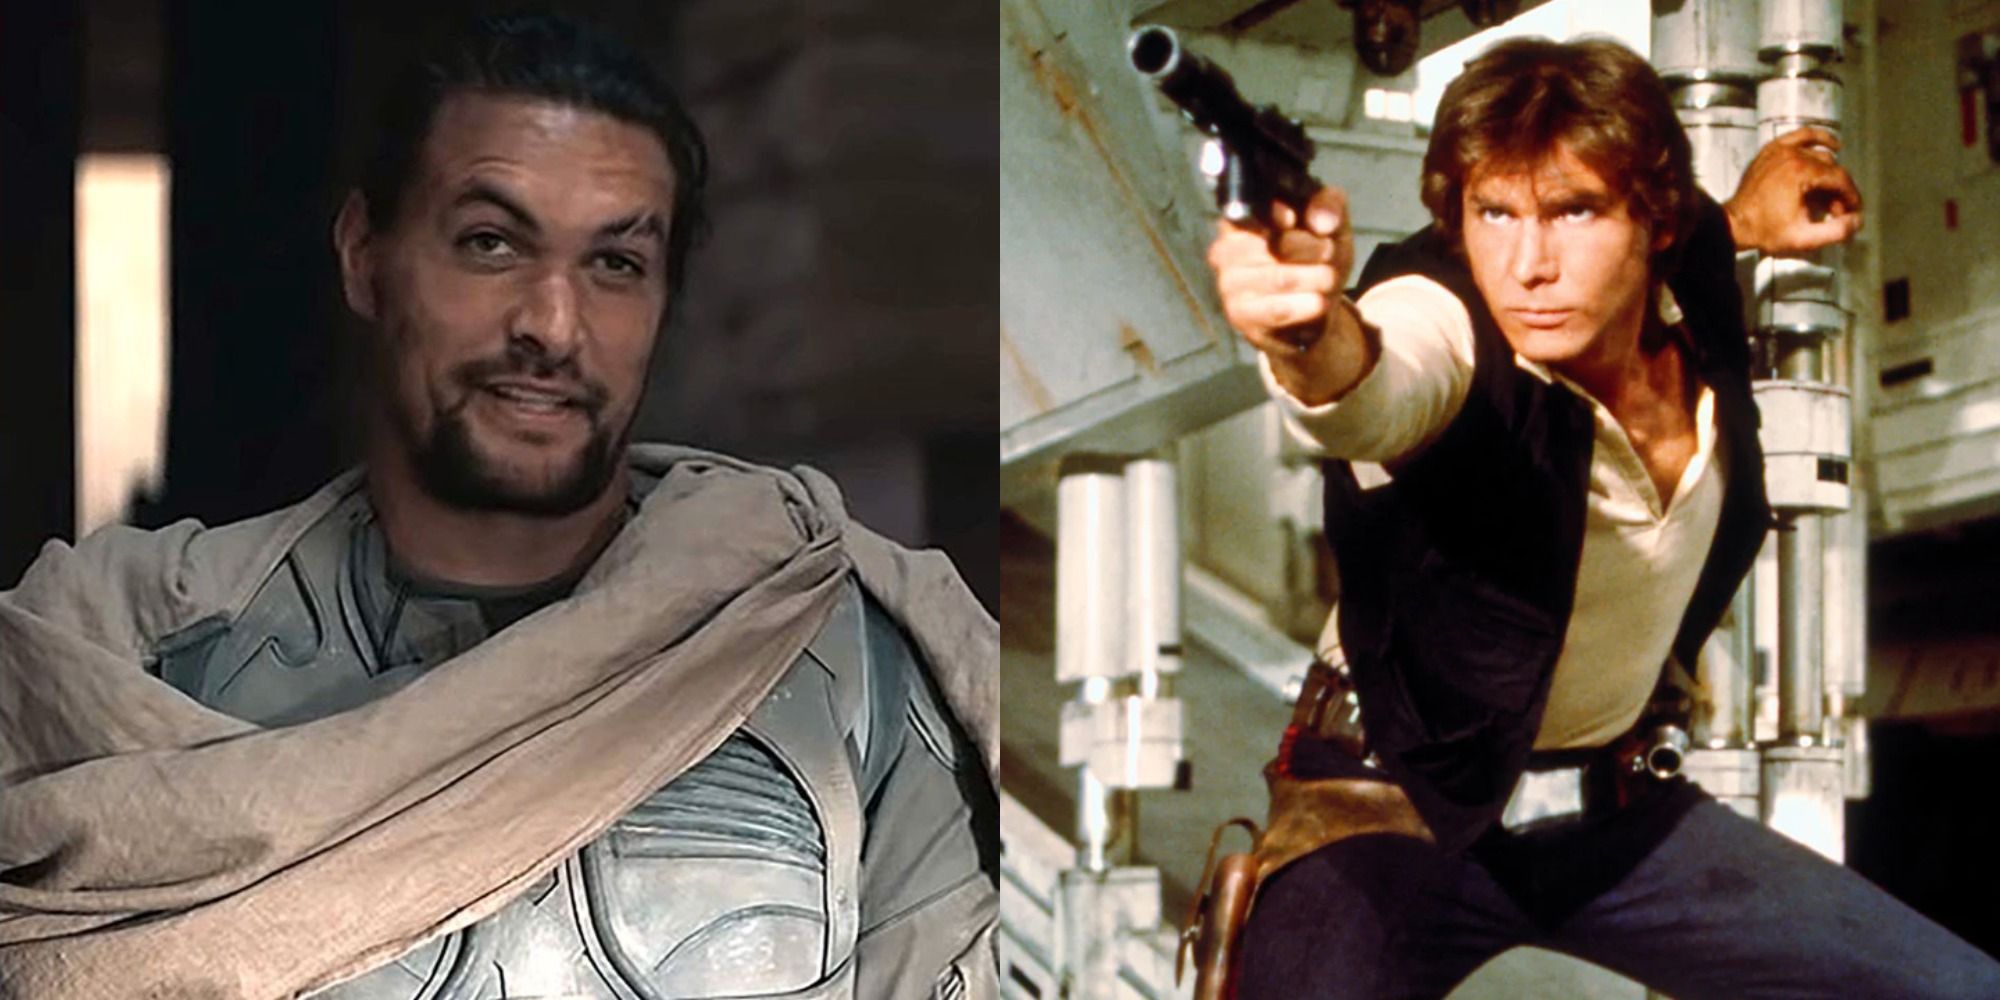 Dune (2021) Characters & Their Star Wars Counterparts